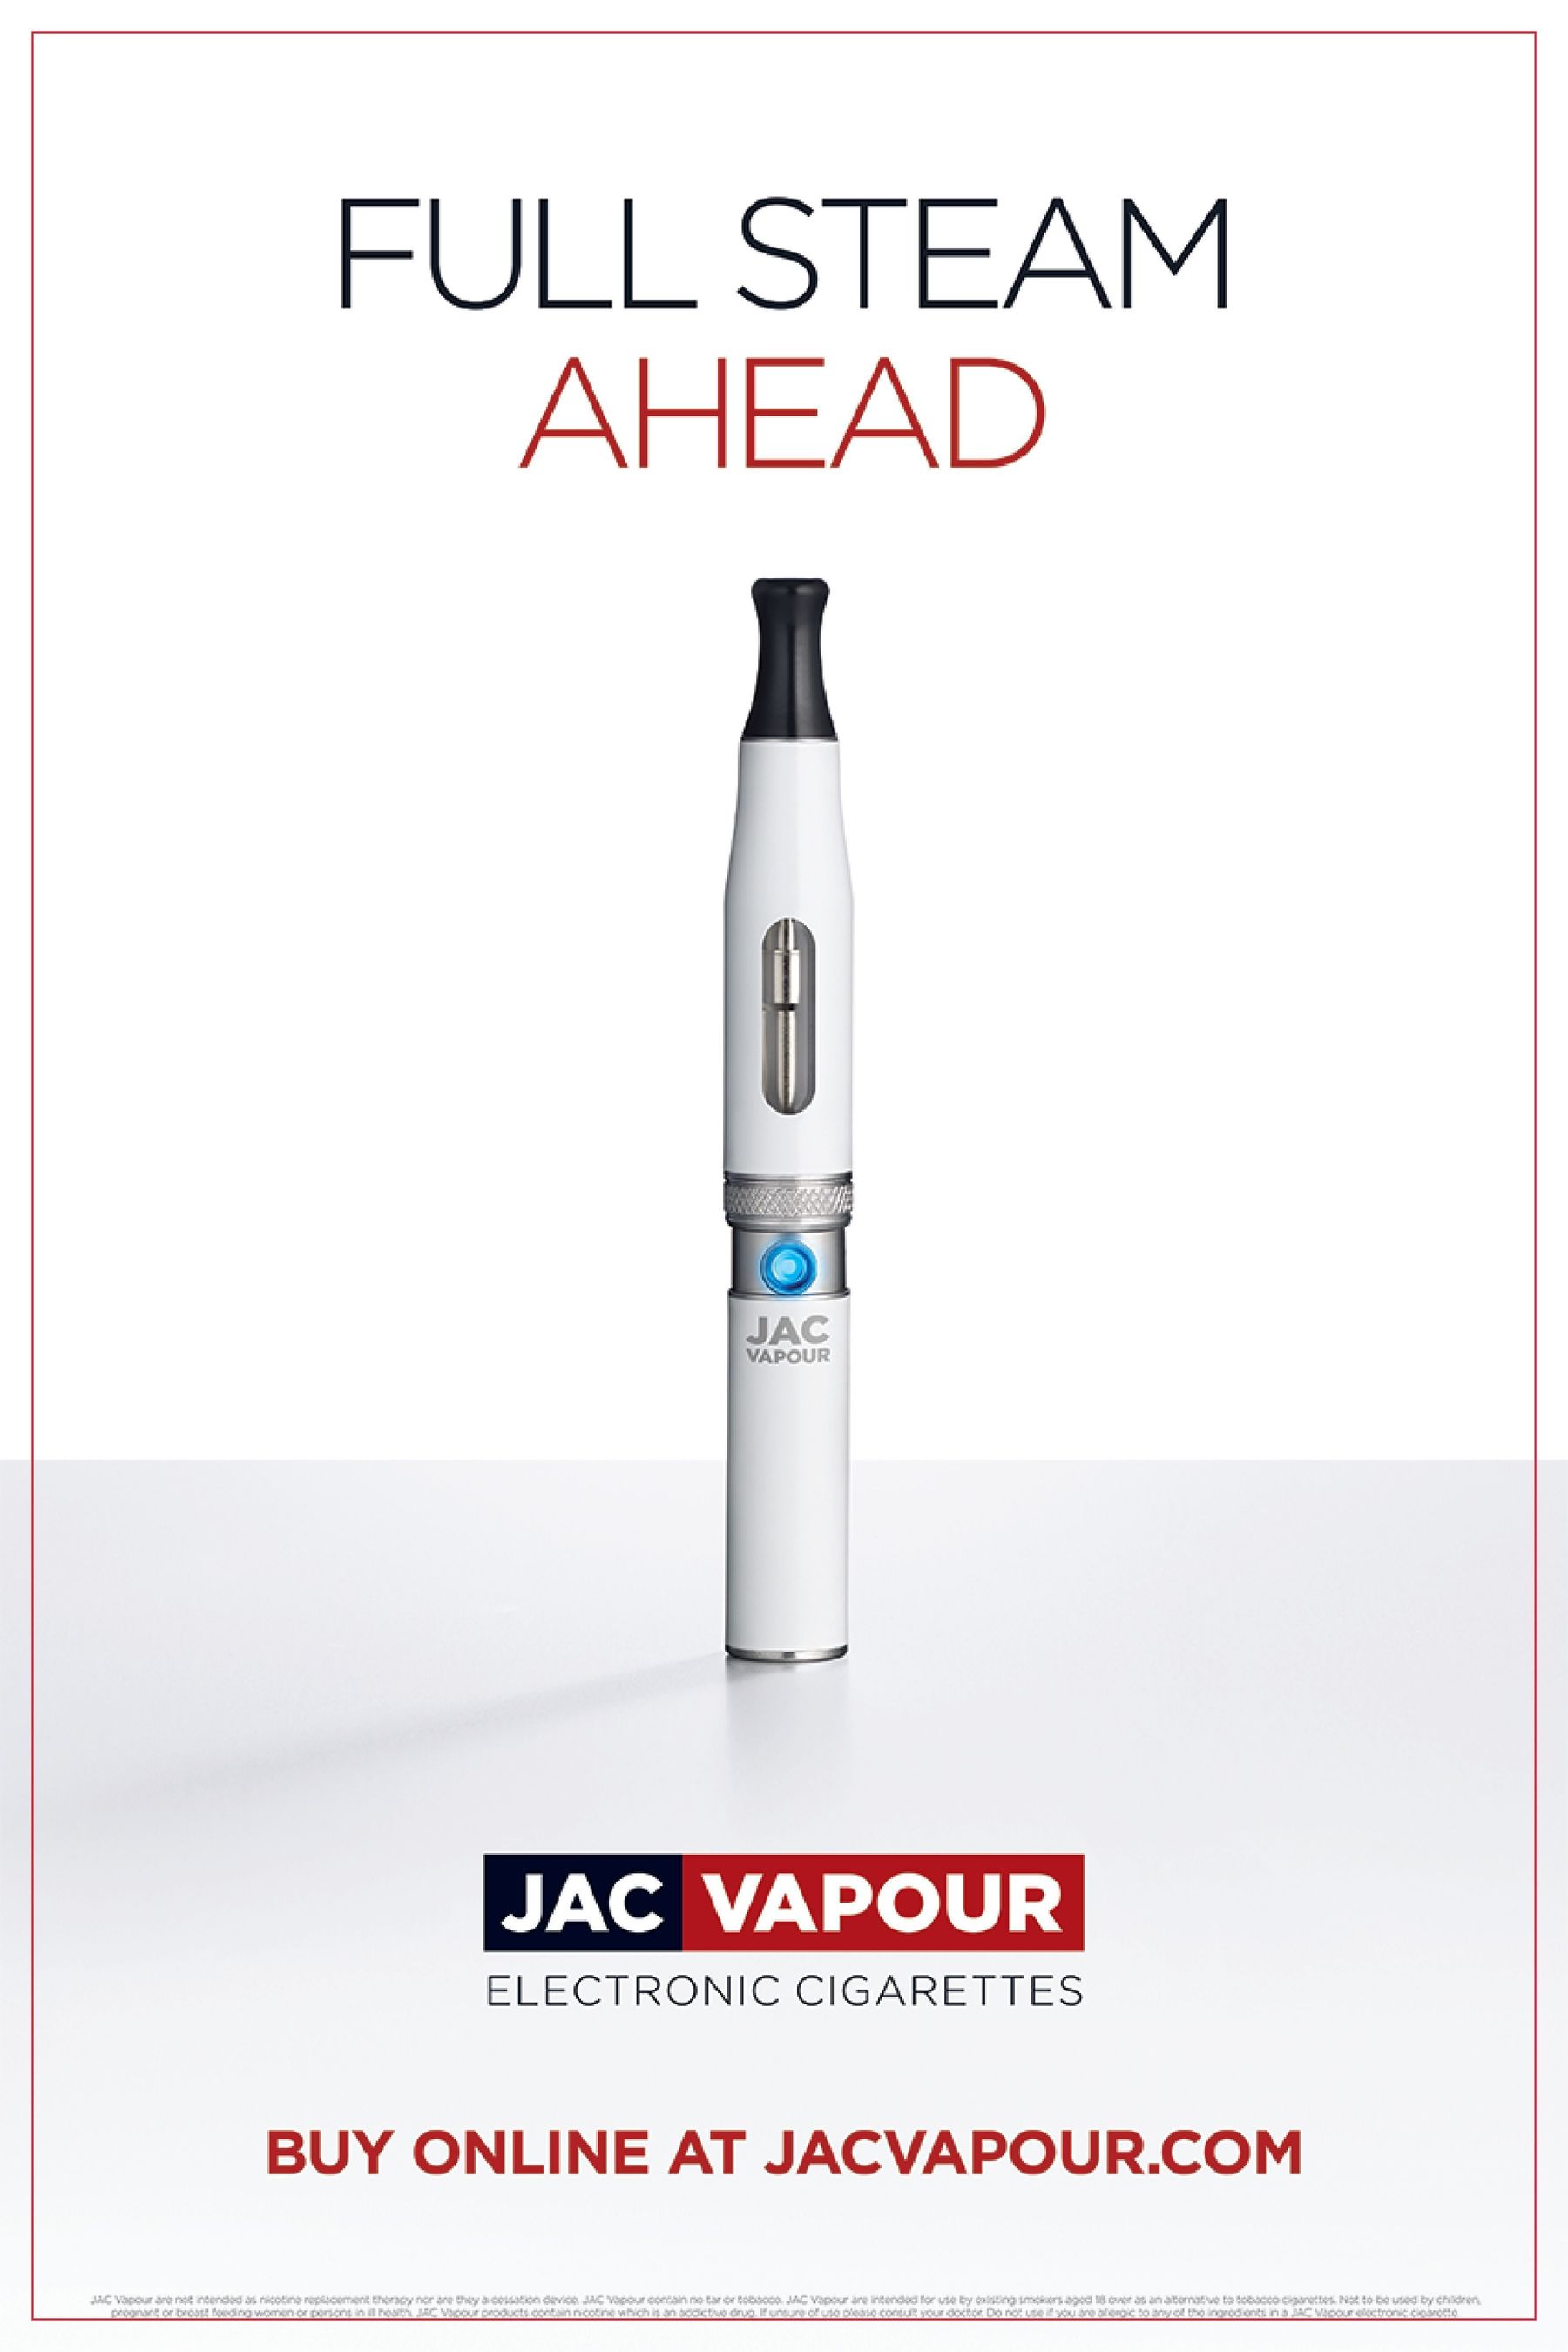 JAC Vapour to Light up E-cigarette Industry with First Advertising Campaign (PRNewsFoto/JAC Vapour)